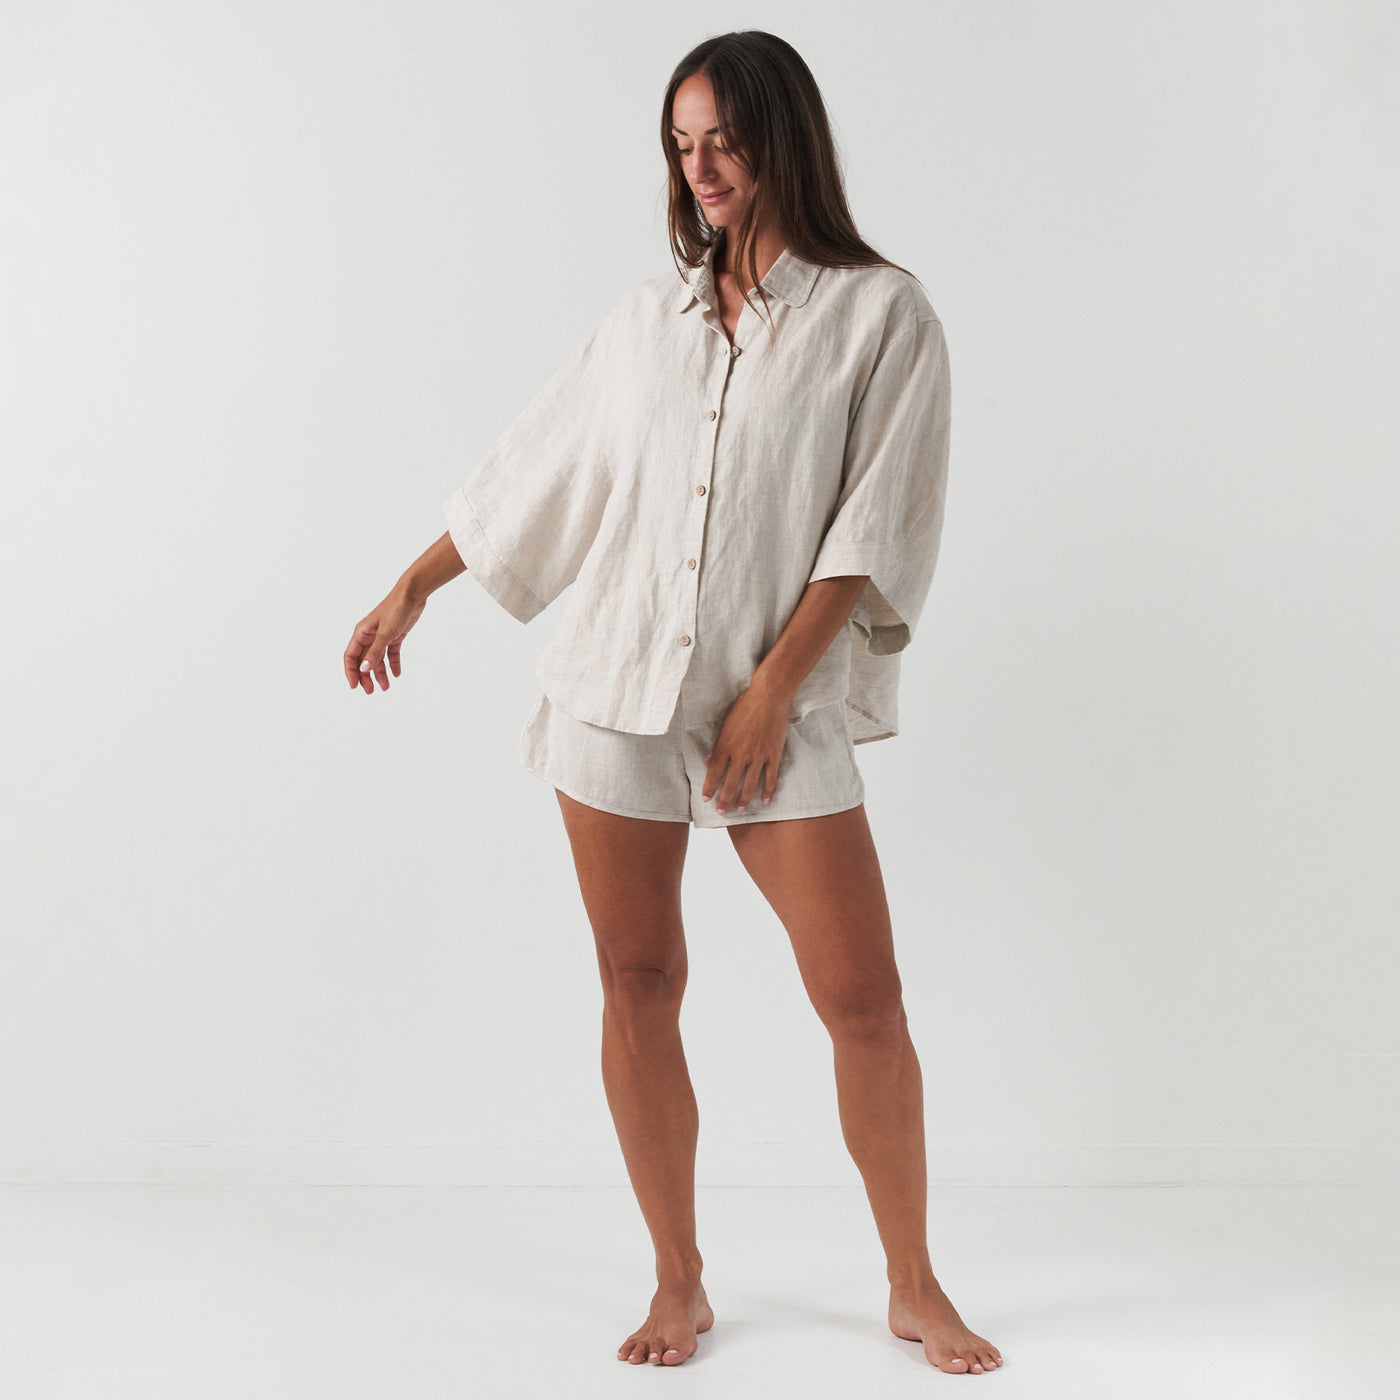 French Flax Linen Ruby Shirt in Natural